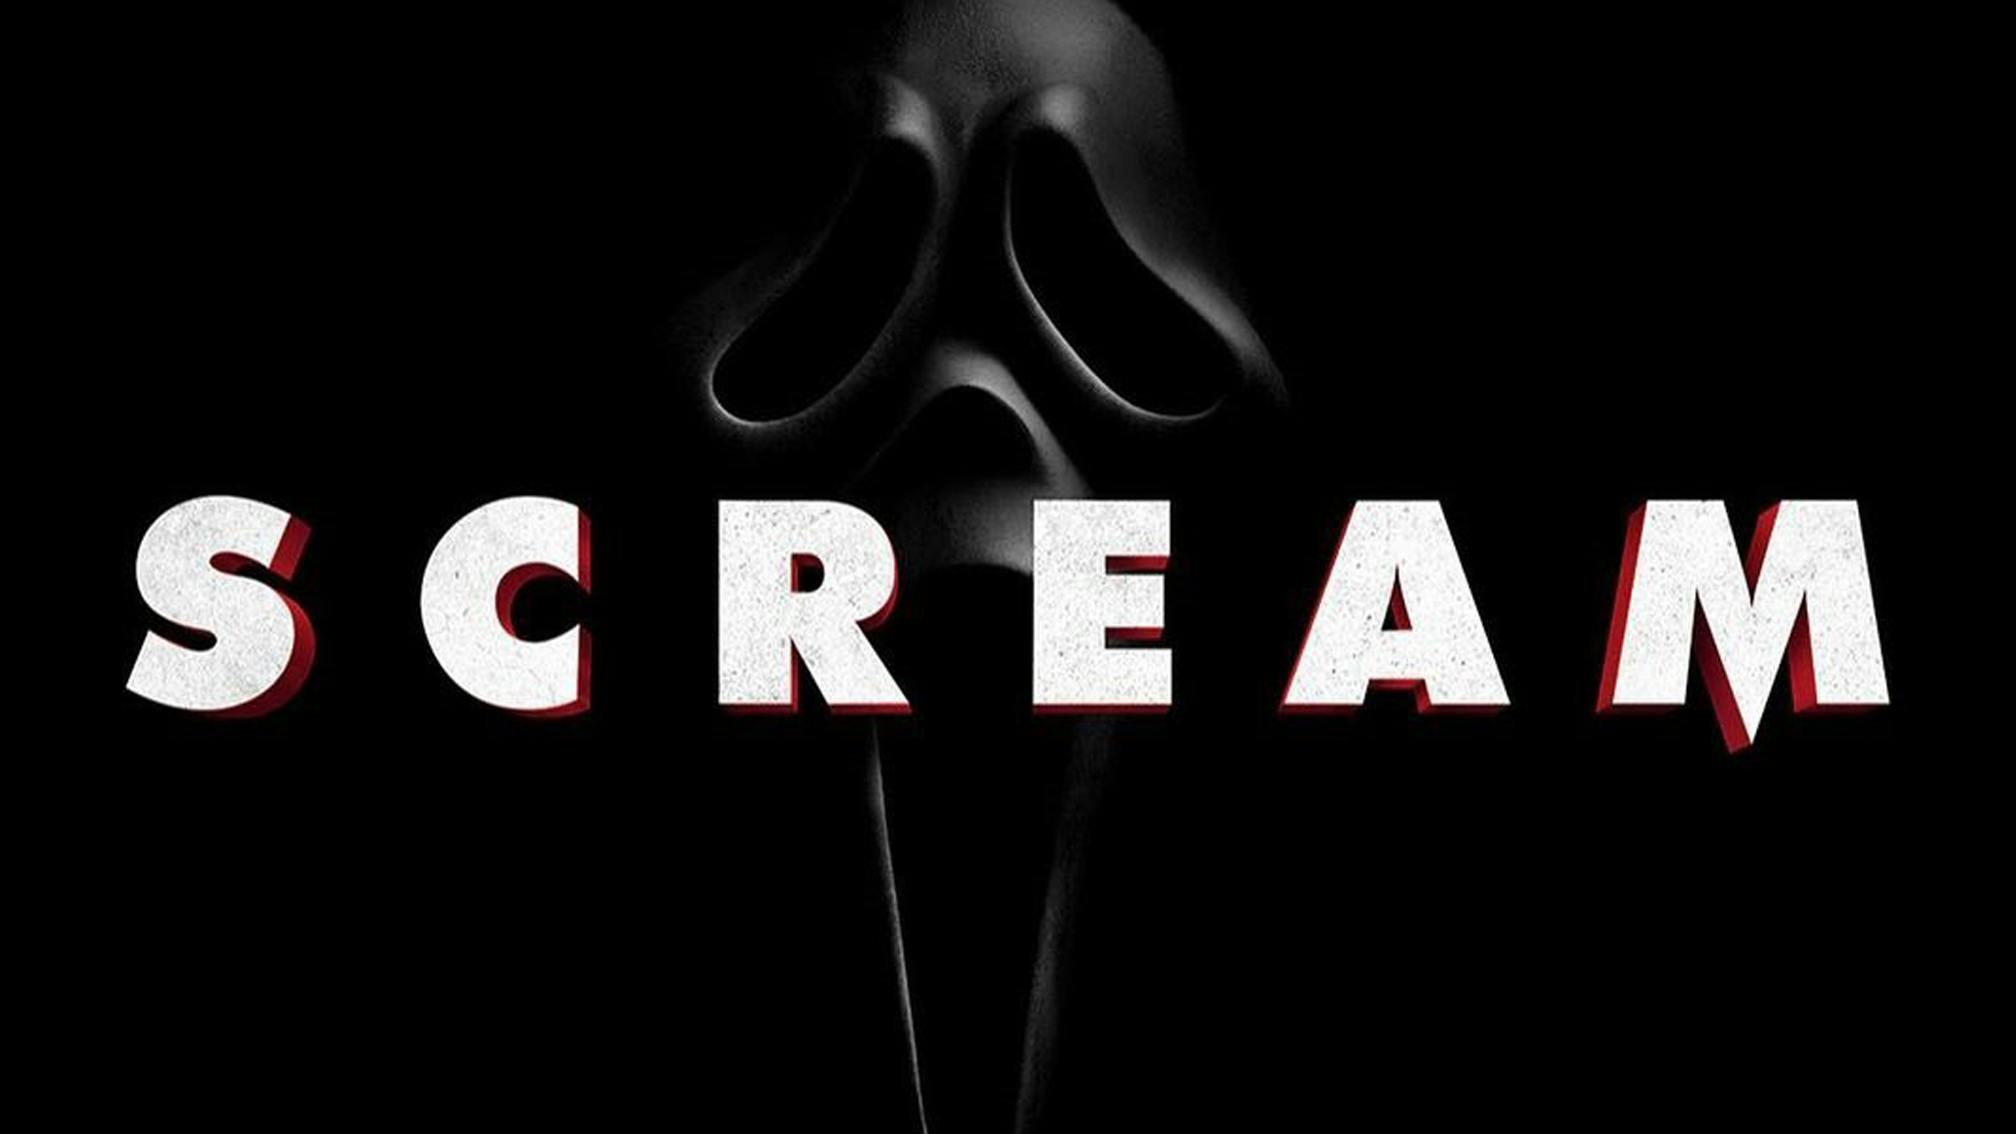 The first trailer for 2022's Scream movie is "coming soon"